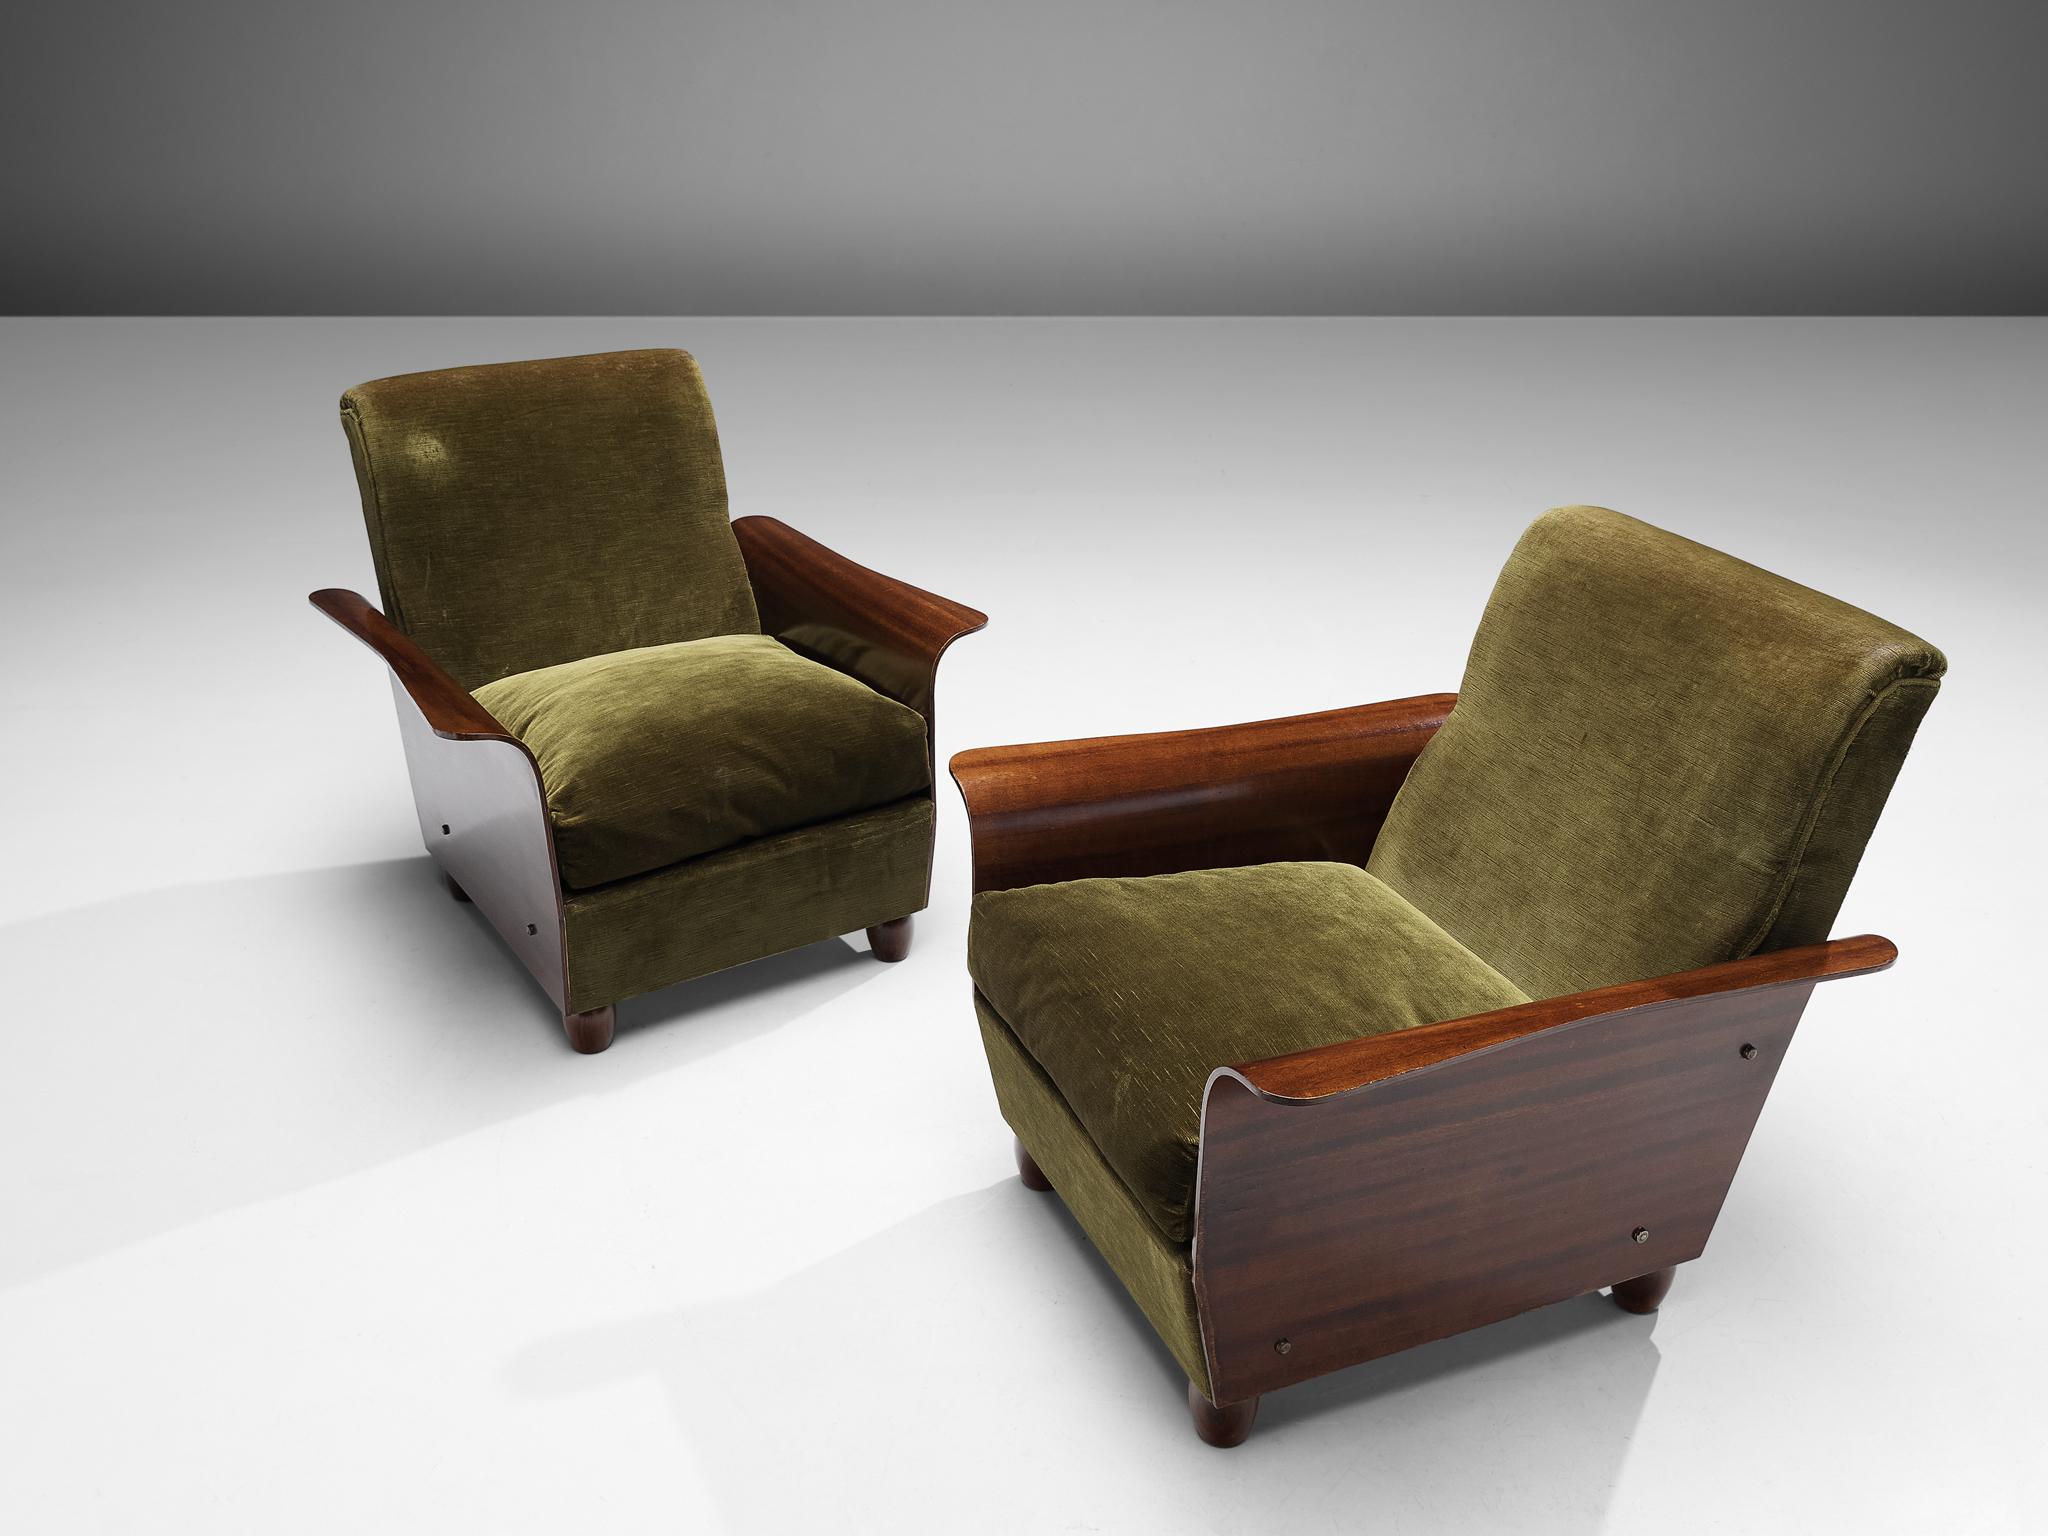 Mid-20th Century Exquisite Pair of Italian Lounge Chairs in Green Velvet Upholstery and Mahogany